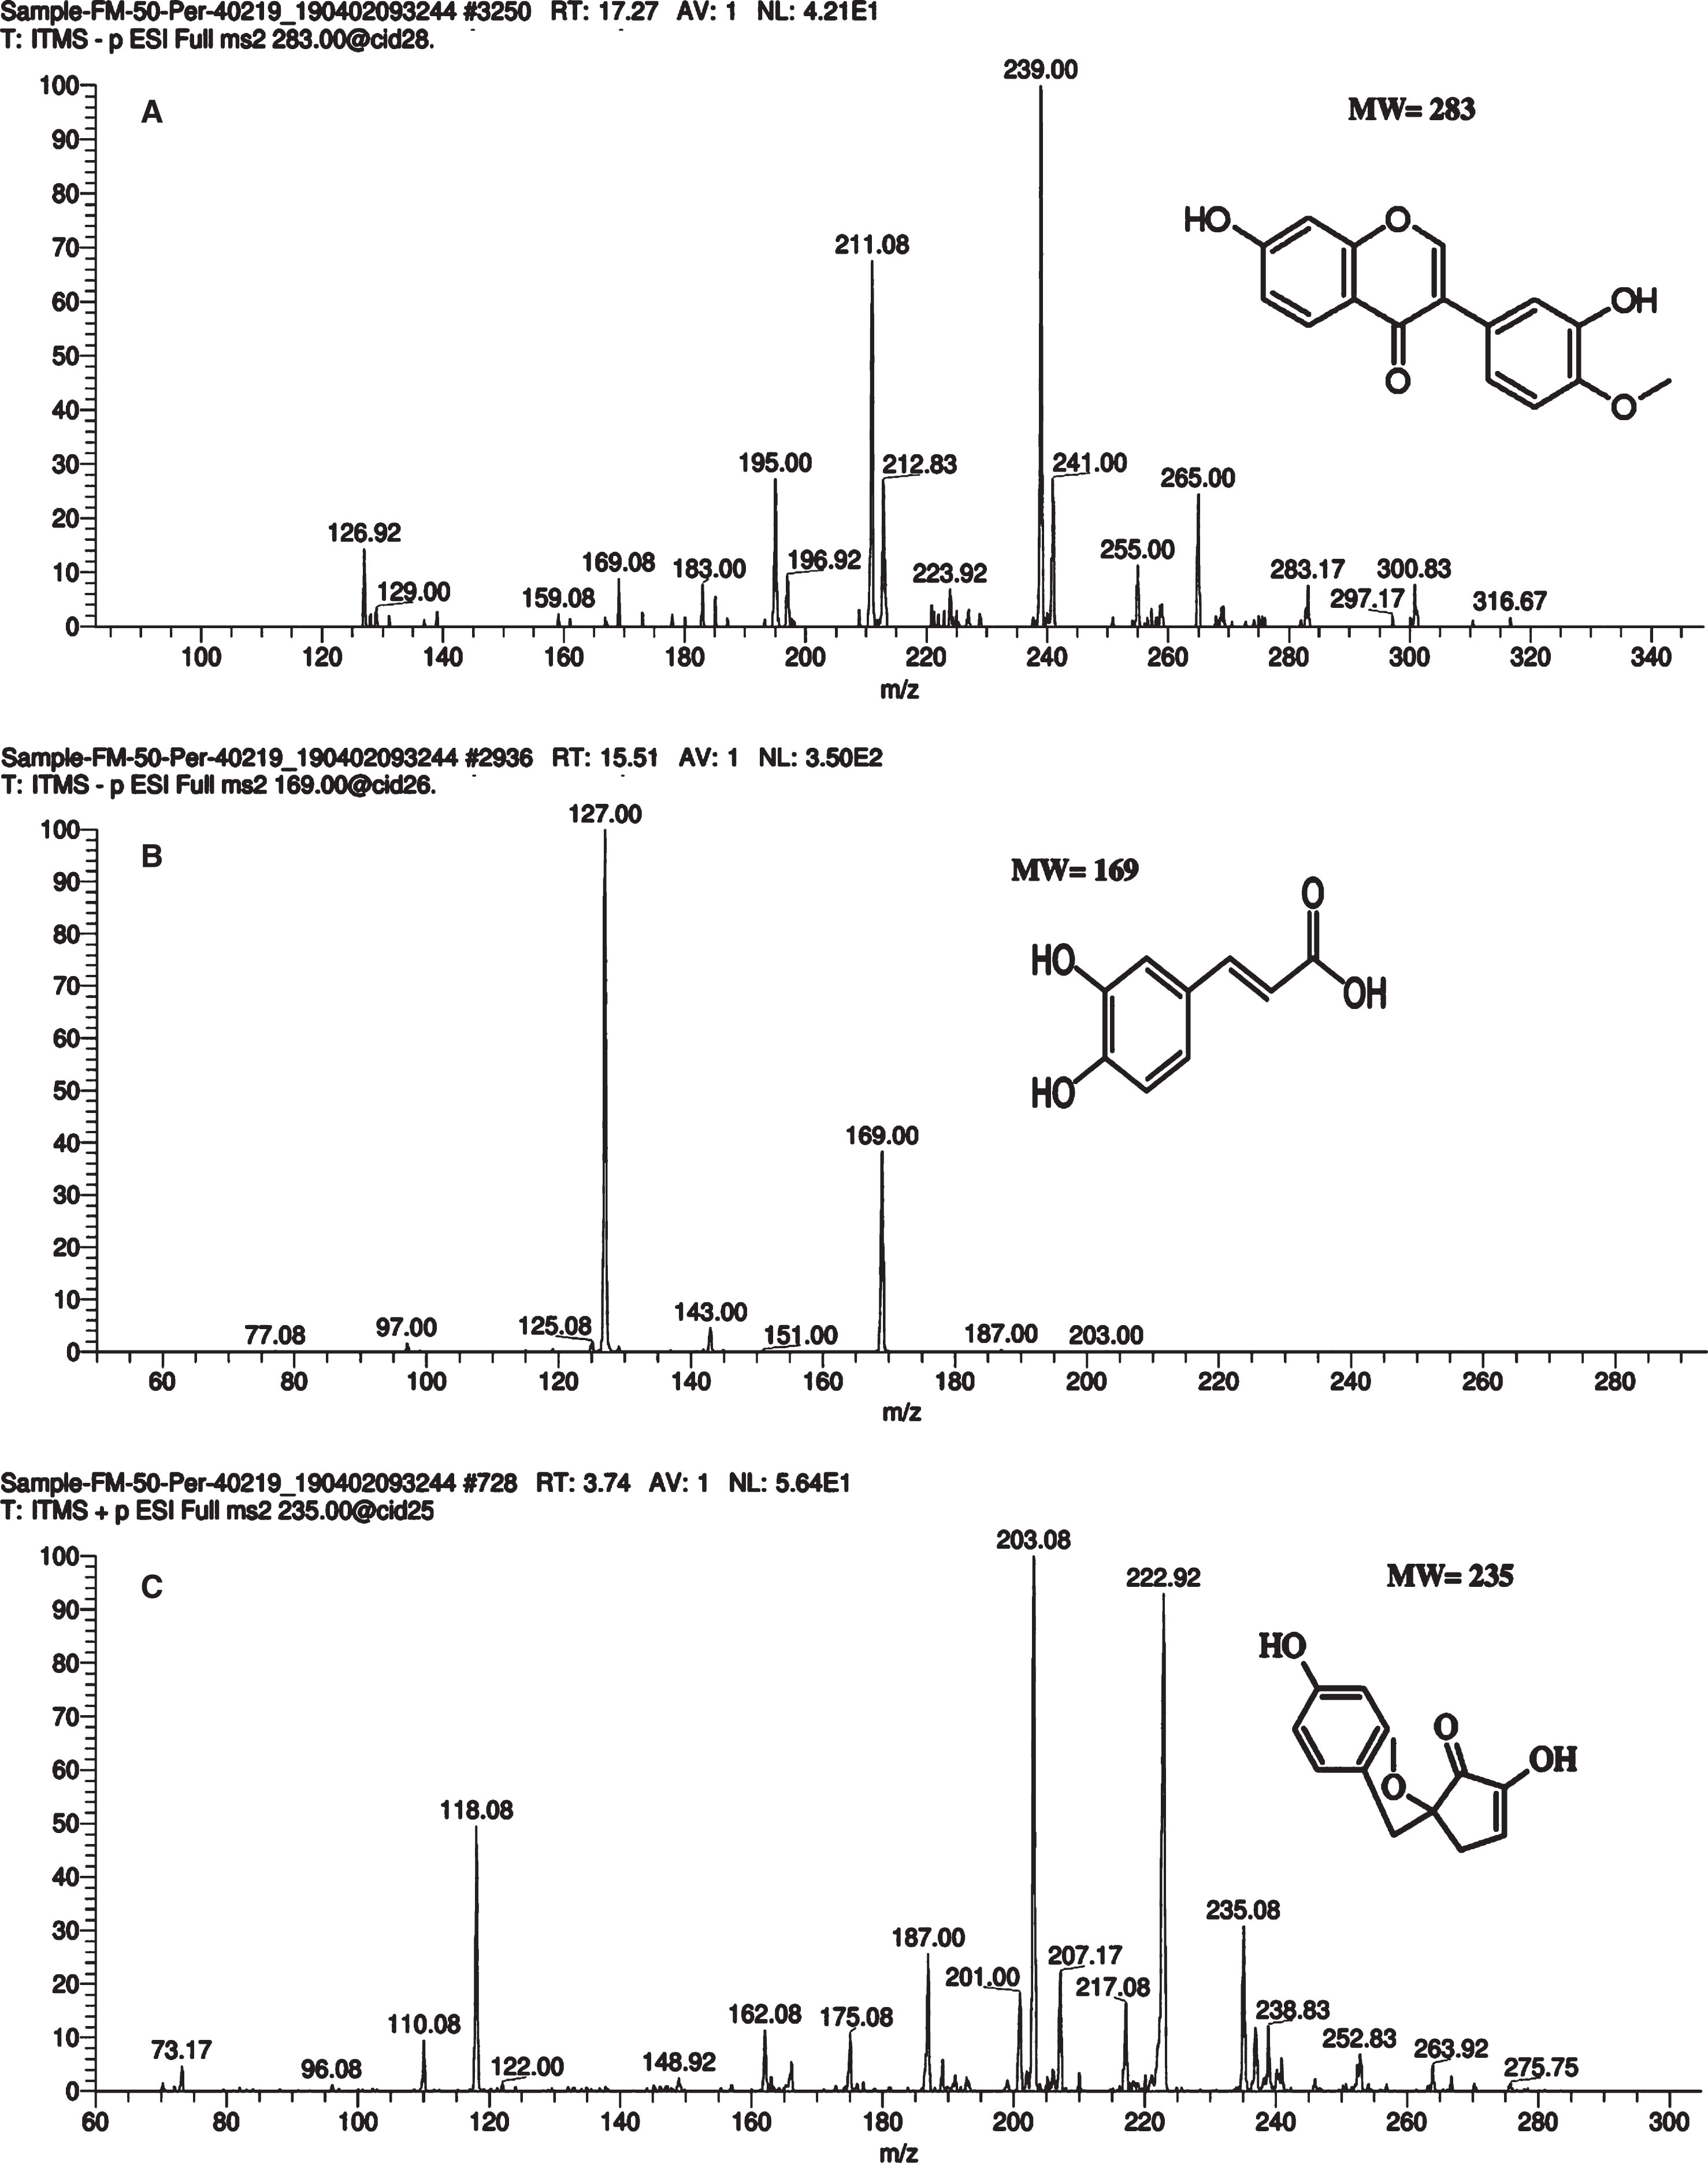 Mass spectrum of bioactive compounds in G. asiatica 50% hydro-methanolic extracts analyzed by liquid chromatography-electrospray ionization-tandem mass spectrometry (LC-ESI-MS/MS). Label:A: Calycosin B: Gallic acid C: Vidalenolone.